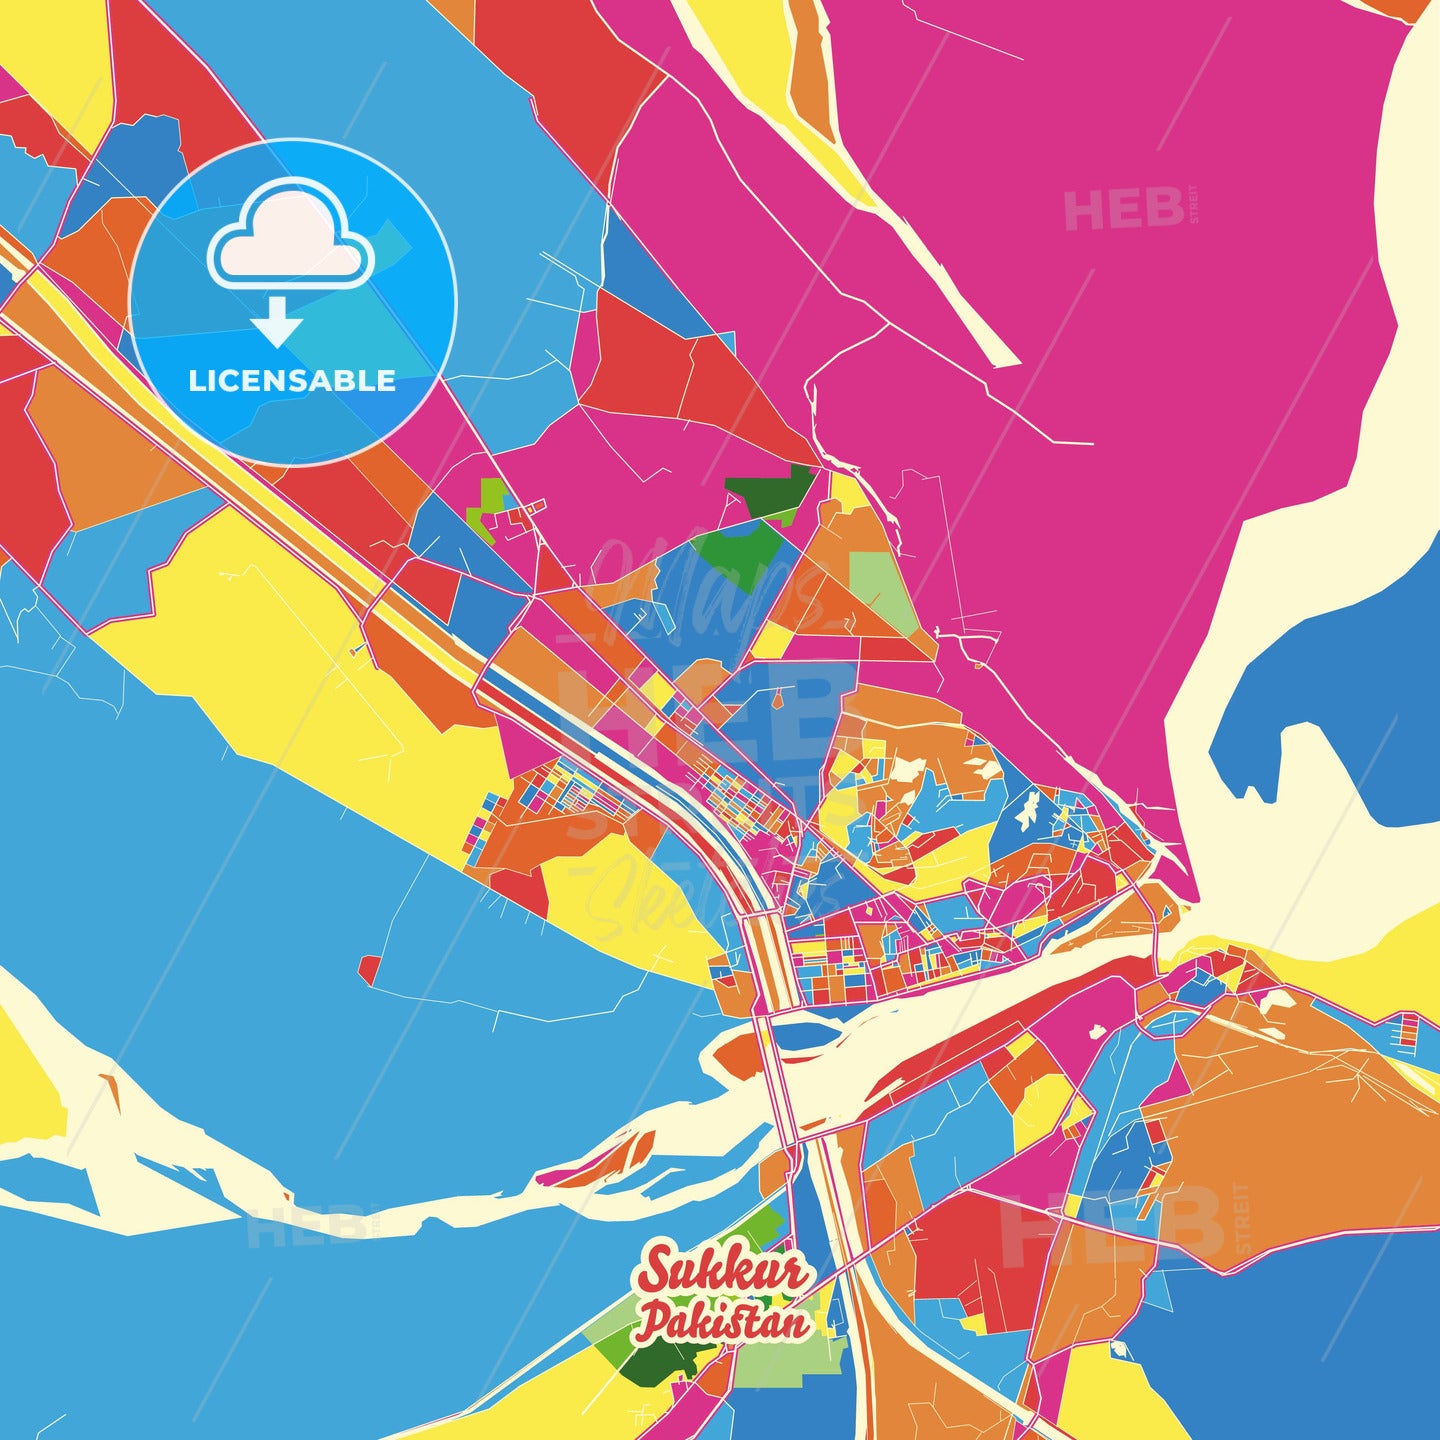 Sukkur, Pakistan Crazy Colorful Street Map Poster Template - HEBSTREITS Sketches